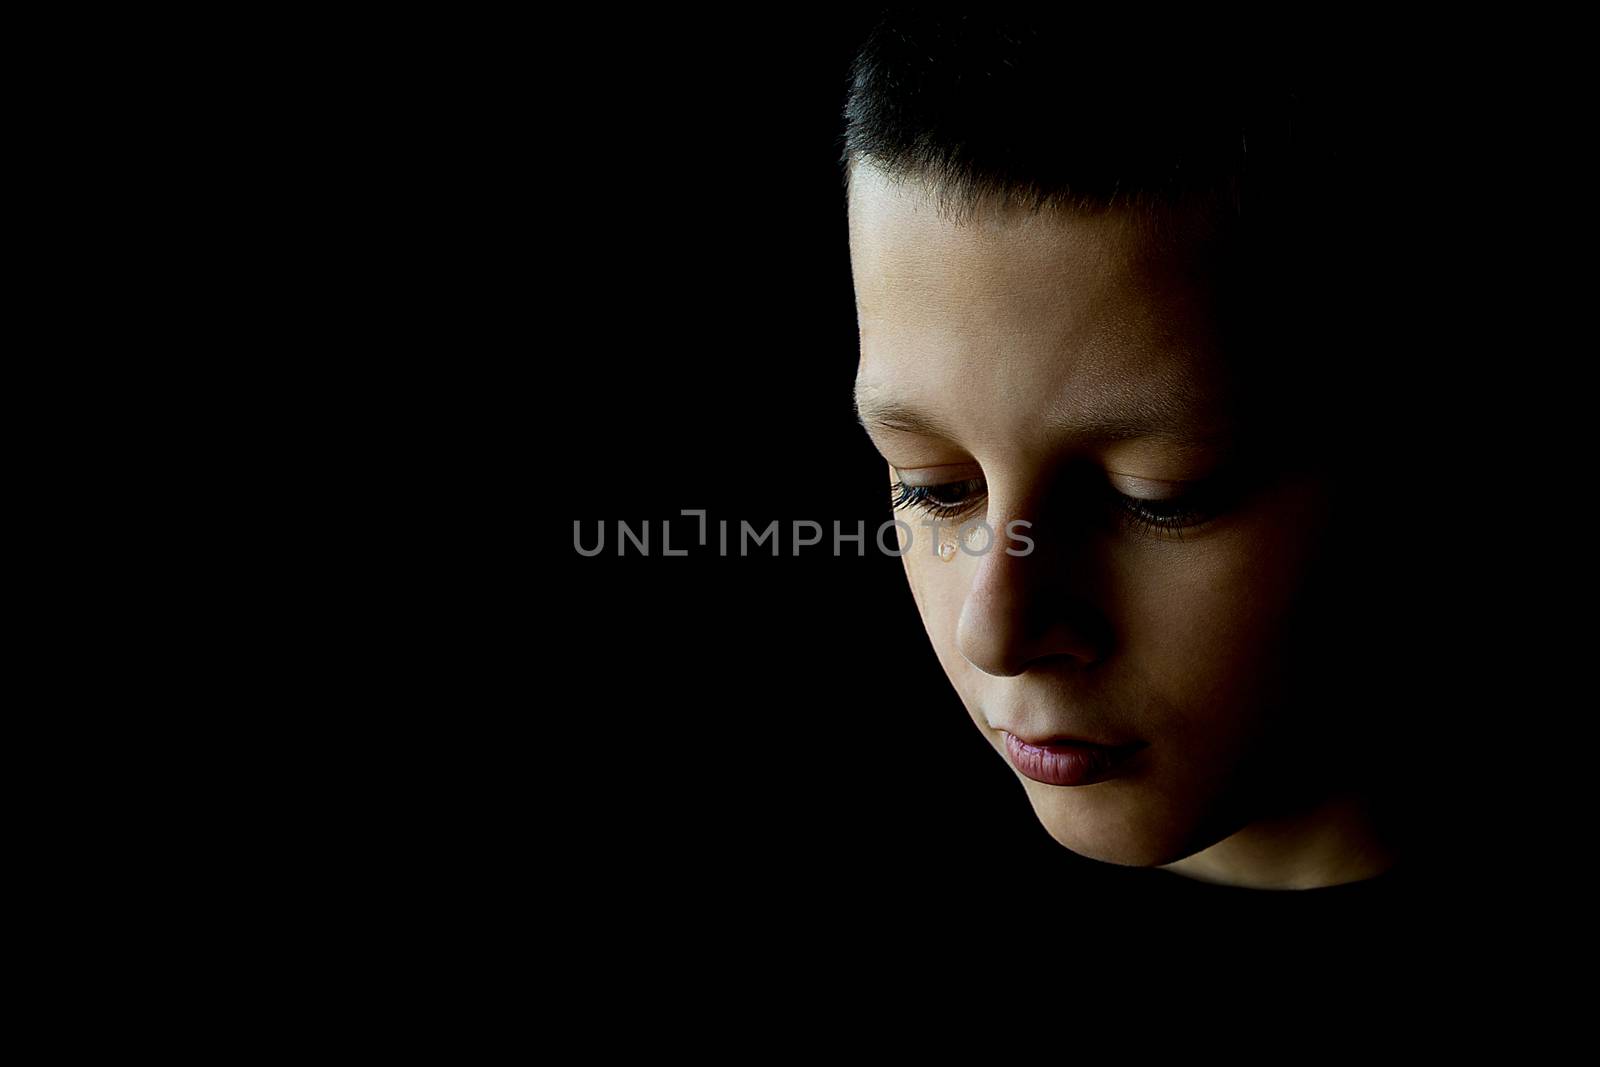 The Sad Boy With Tears in Their Eyes on a Black Background by Victority